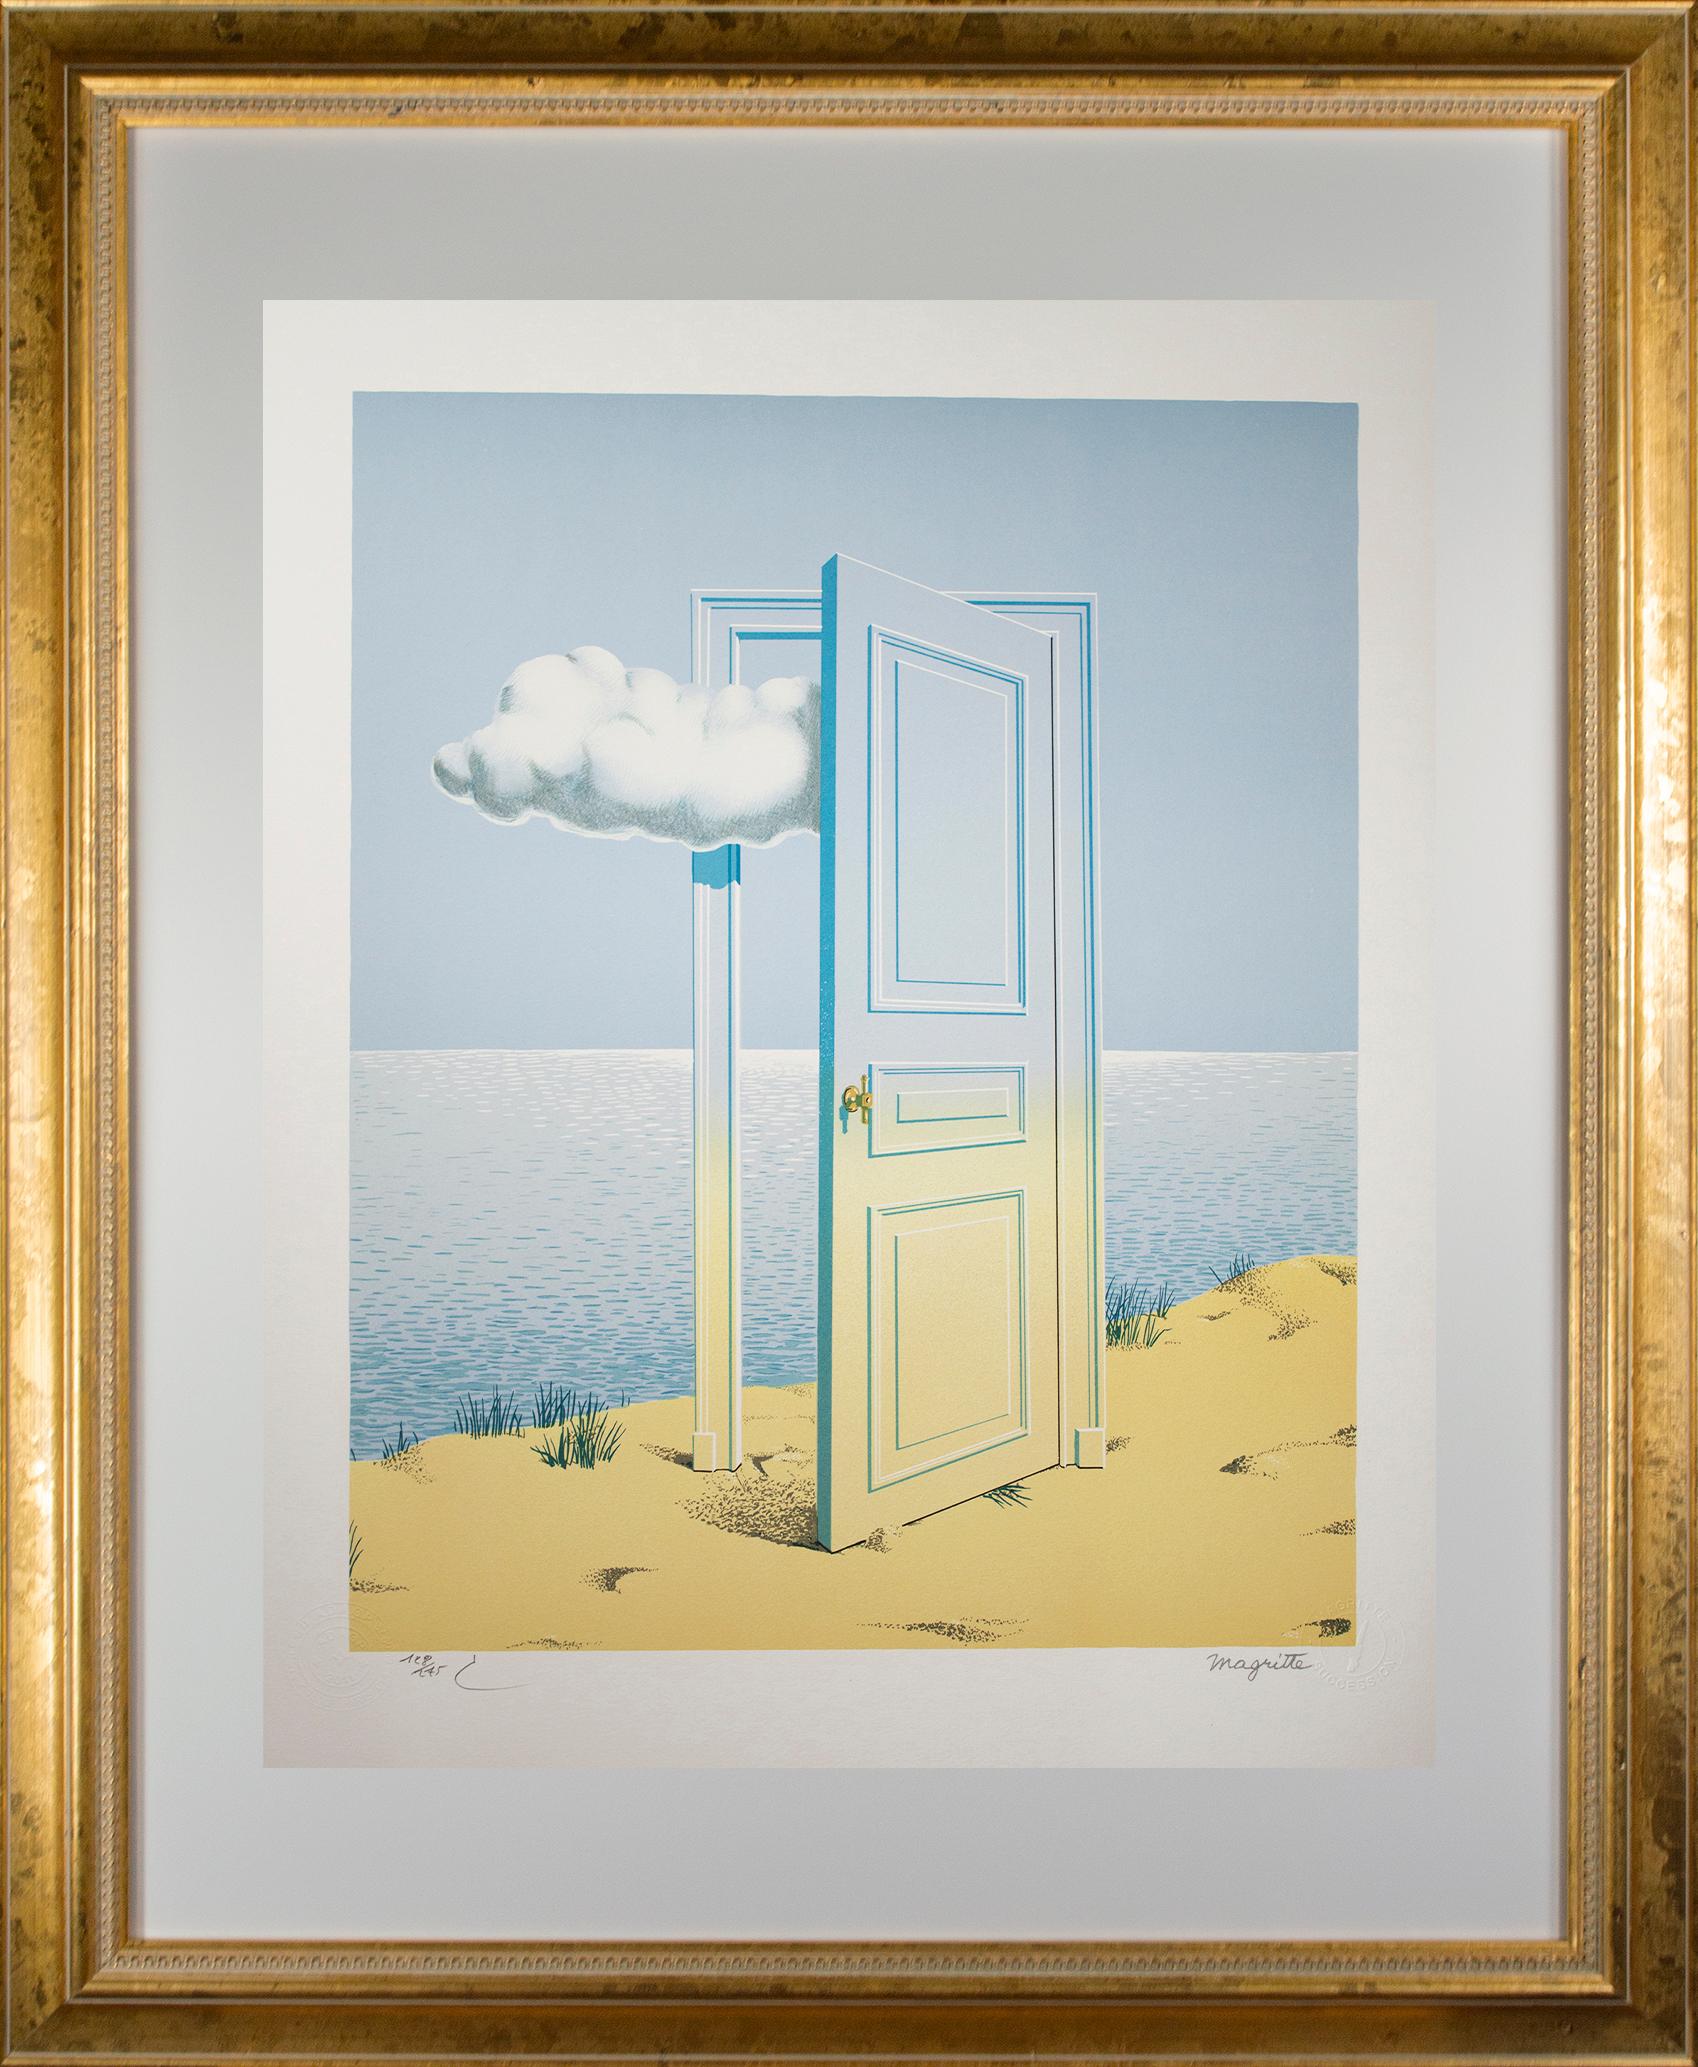 rene magritte lithograph